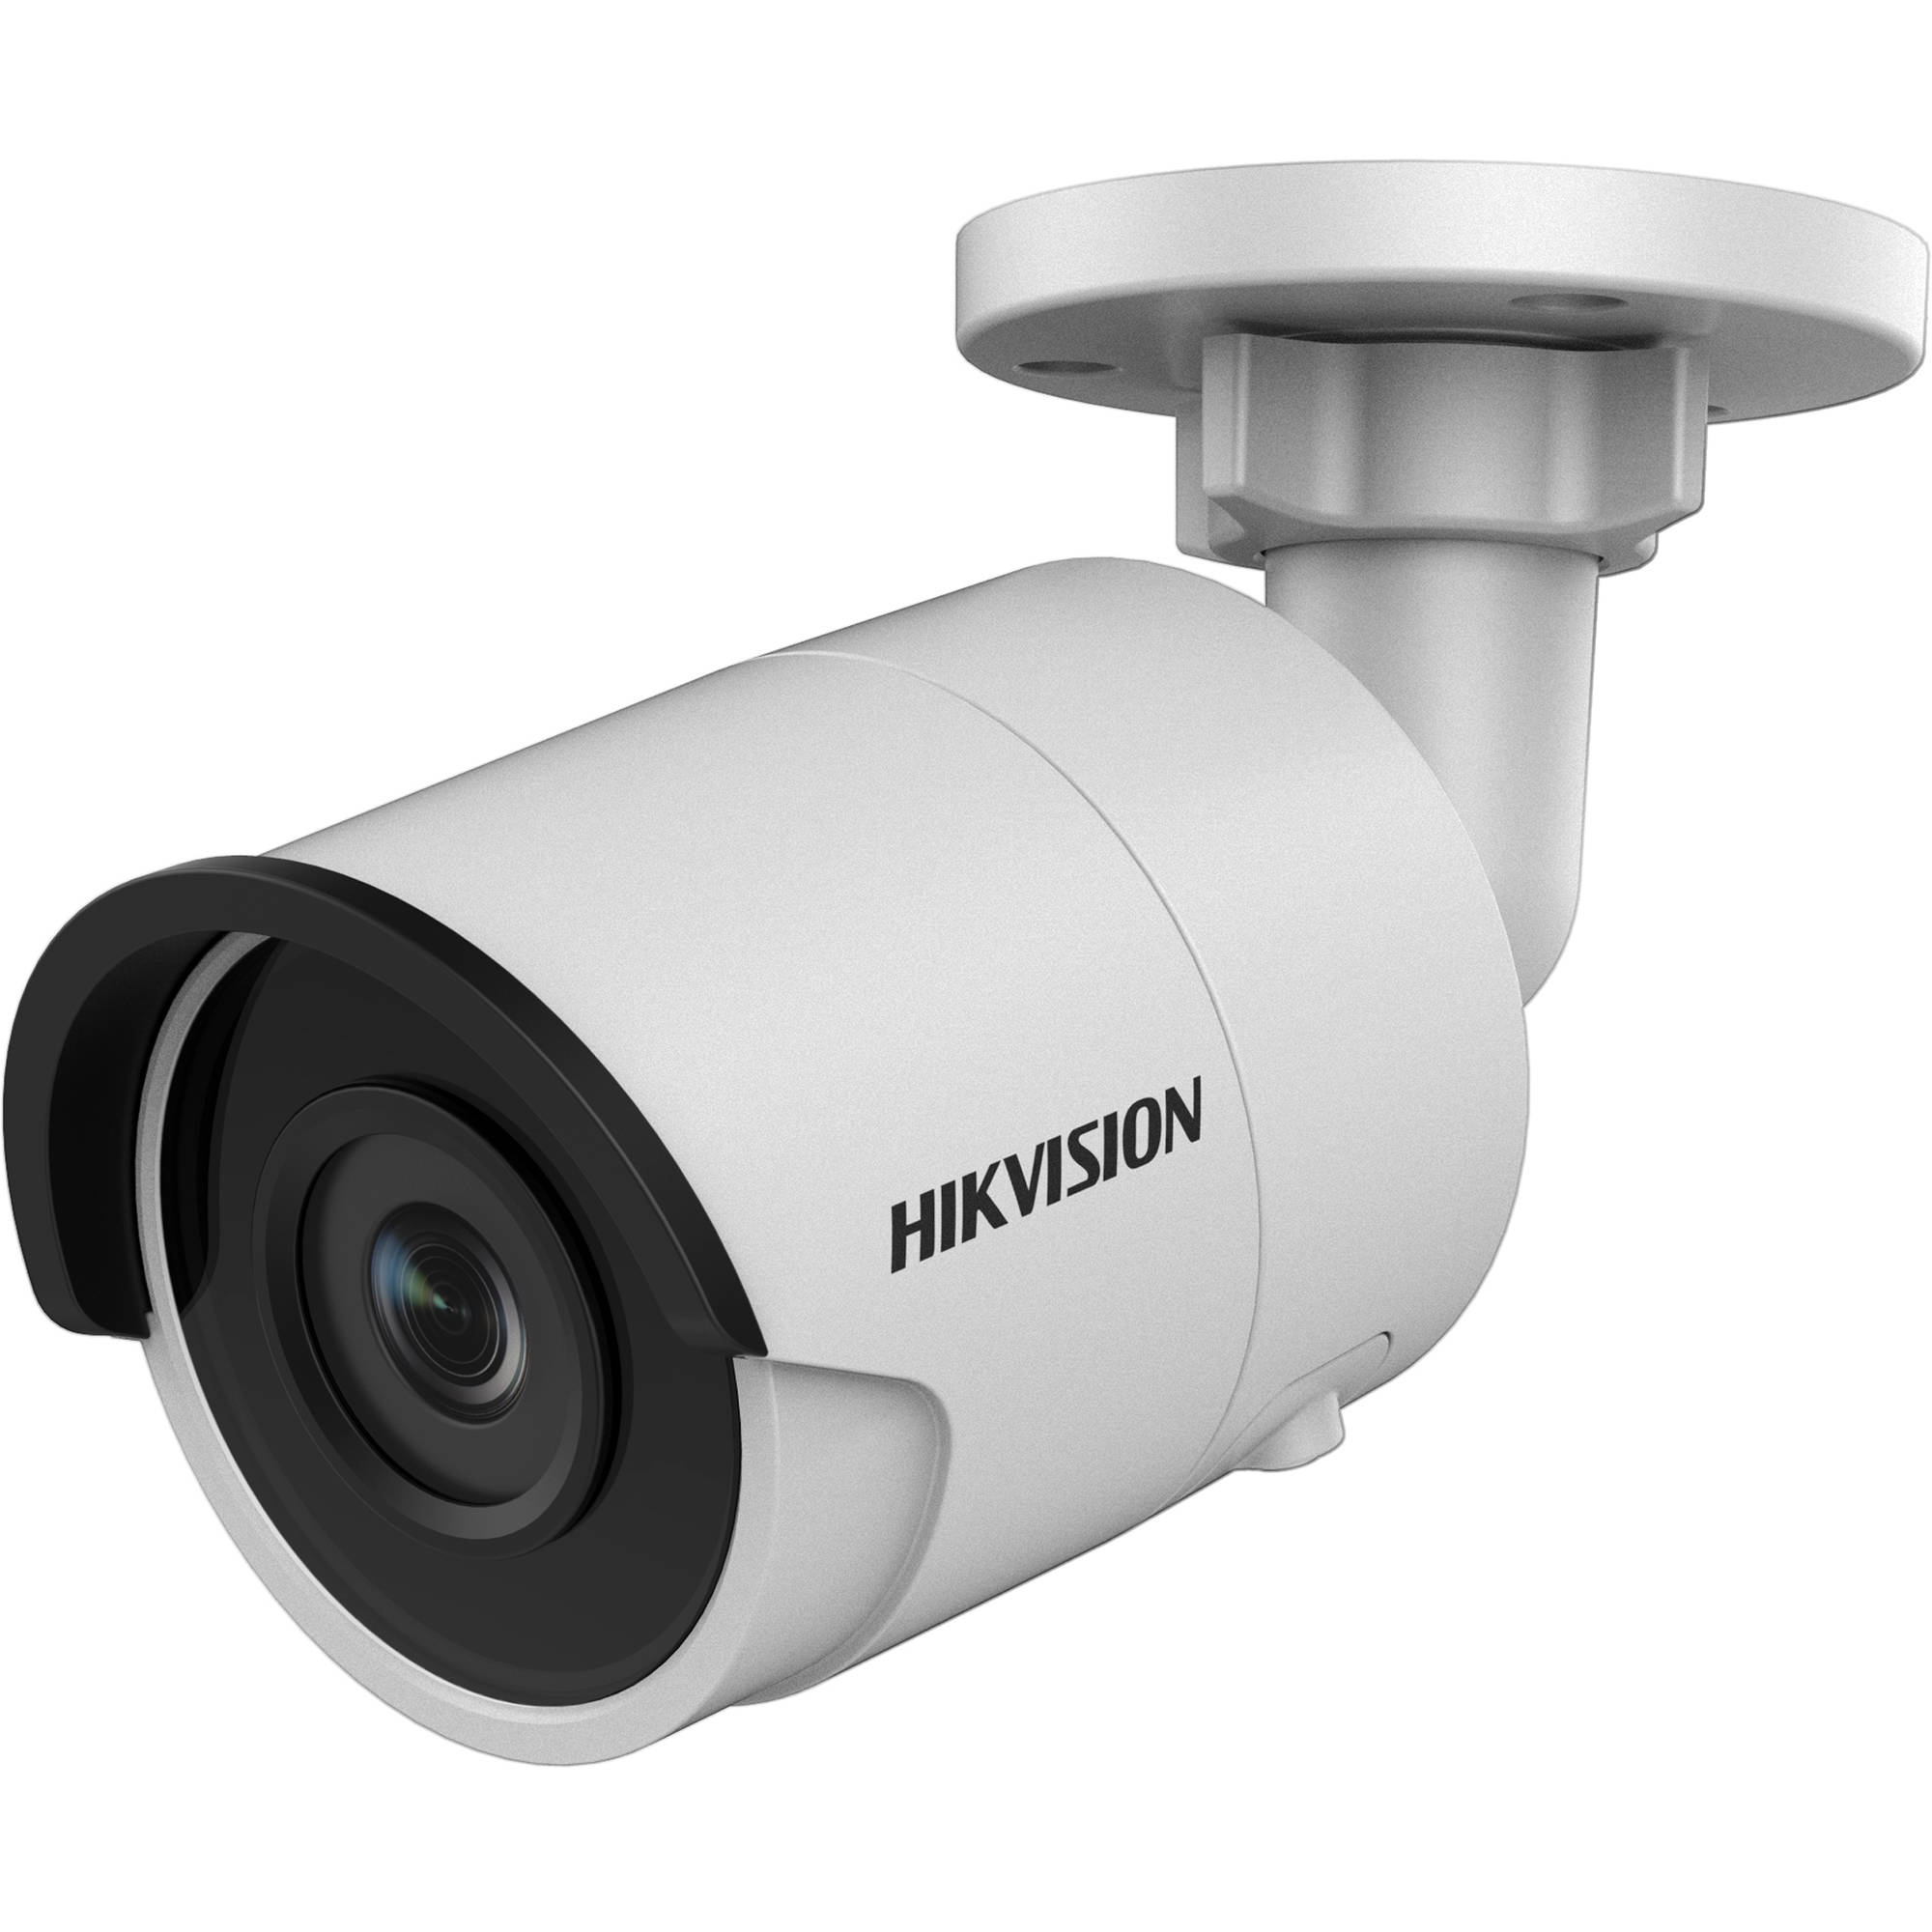 Hikvision DS-2CD2045FWD-I 4MP Outdoor 